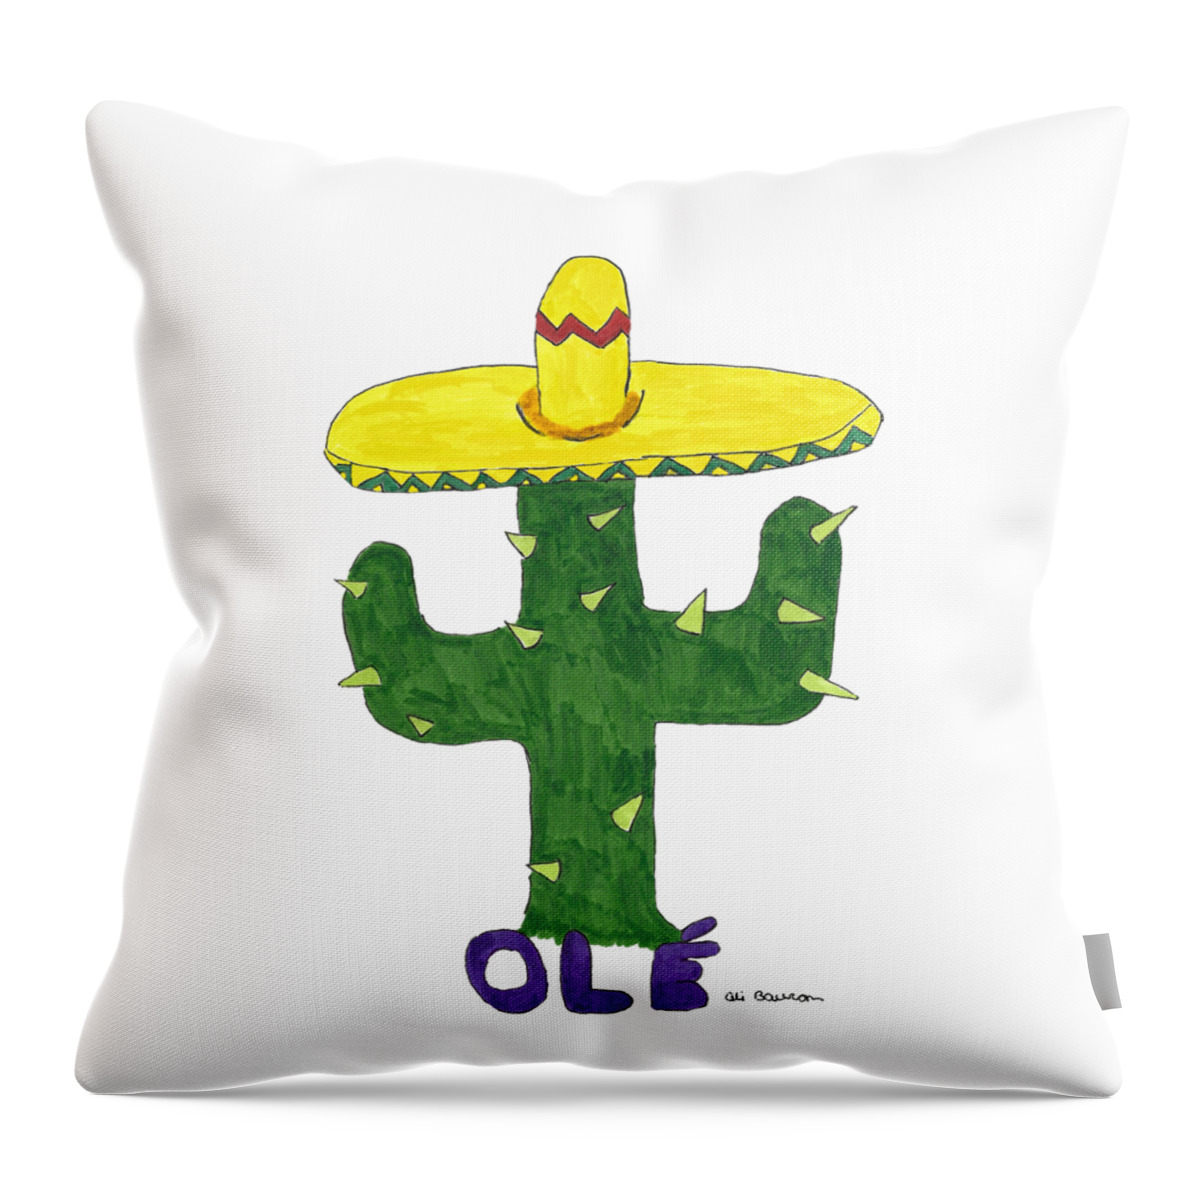 Olé Throw Pillow featuring the drawing Ole Cactus by Ali Baucom